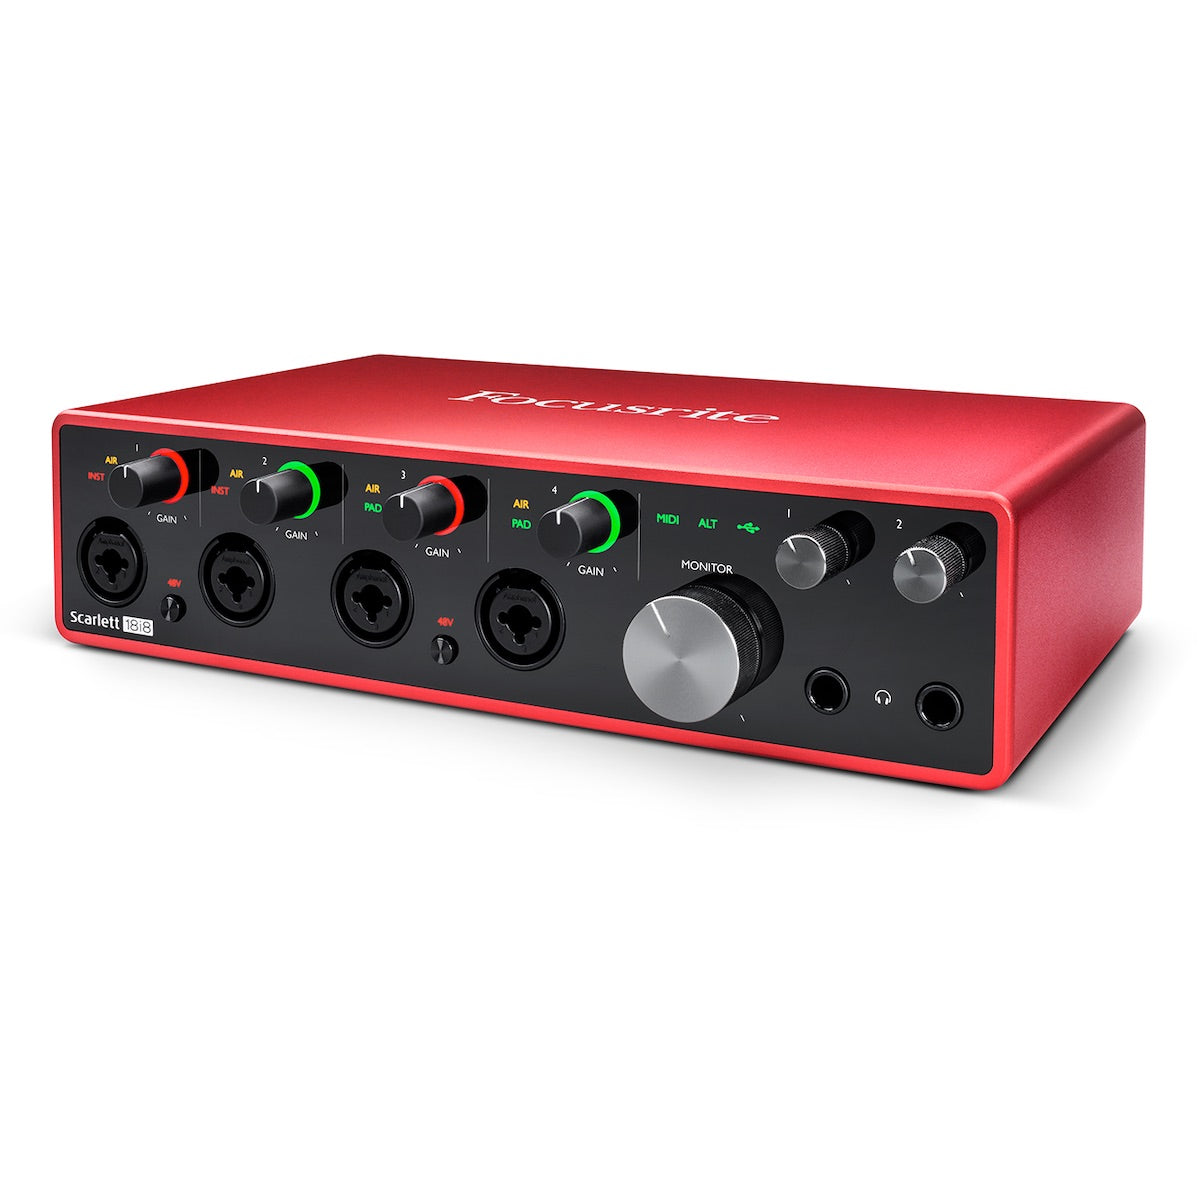 Focusrite Scarlett 18i8 - USB 2.0 Audio Interface with 18-in/8-out (3rd Gen), right